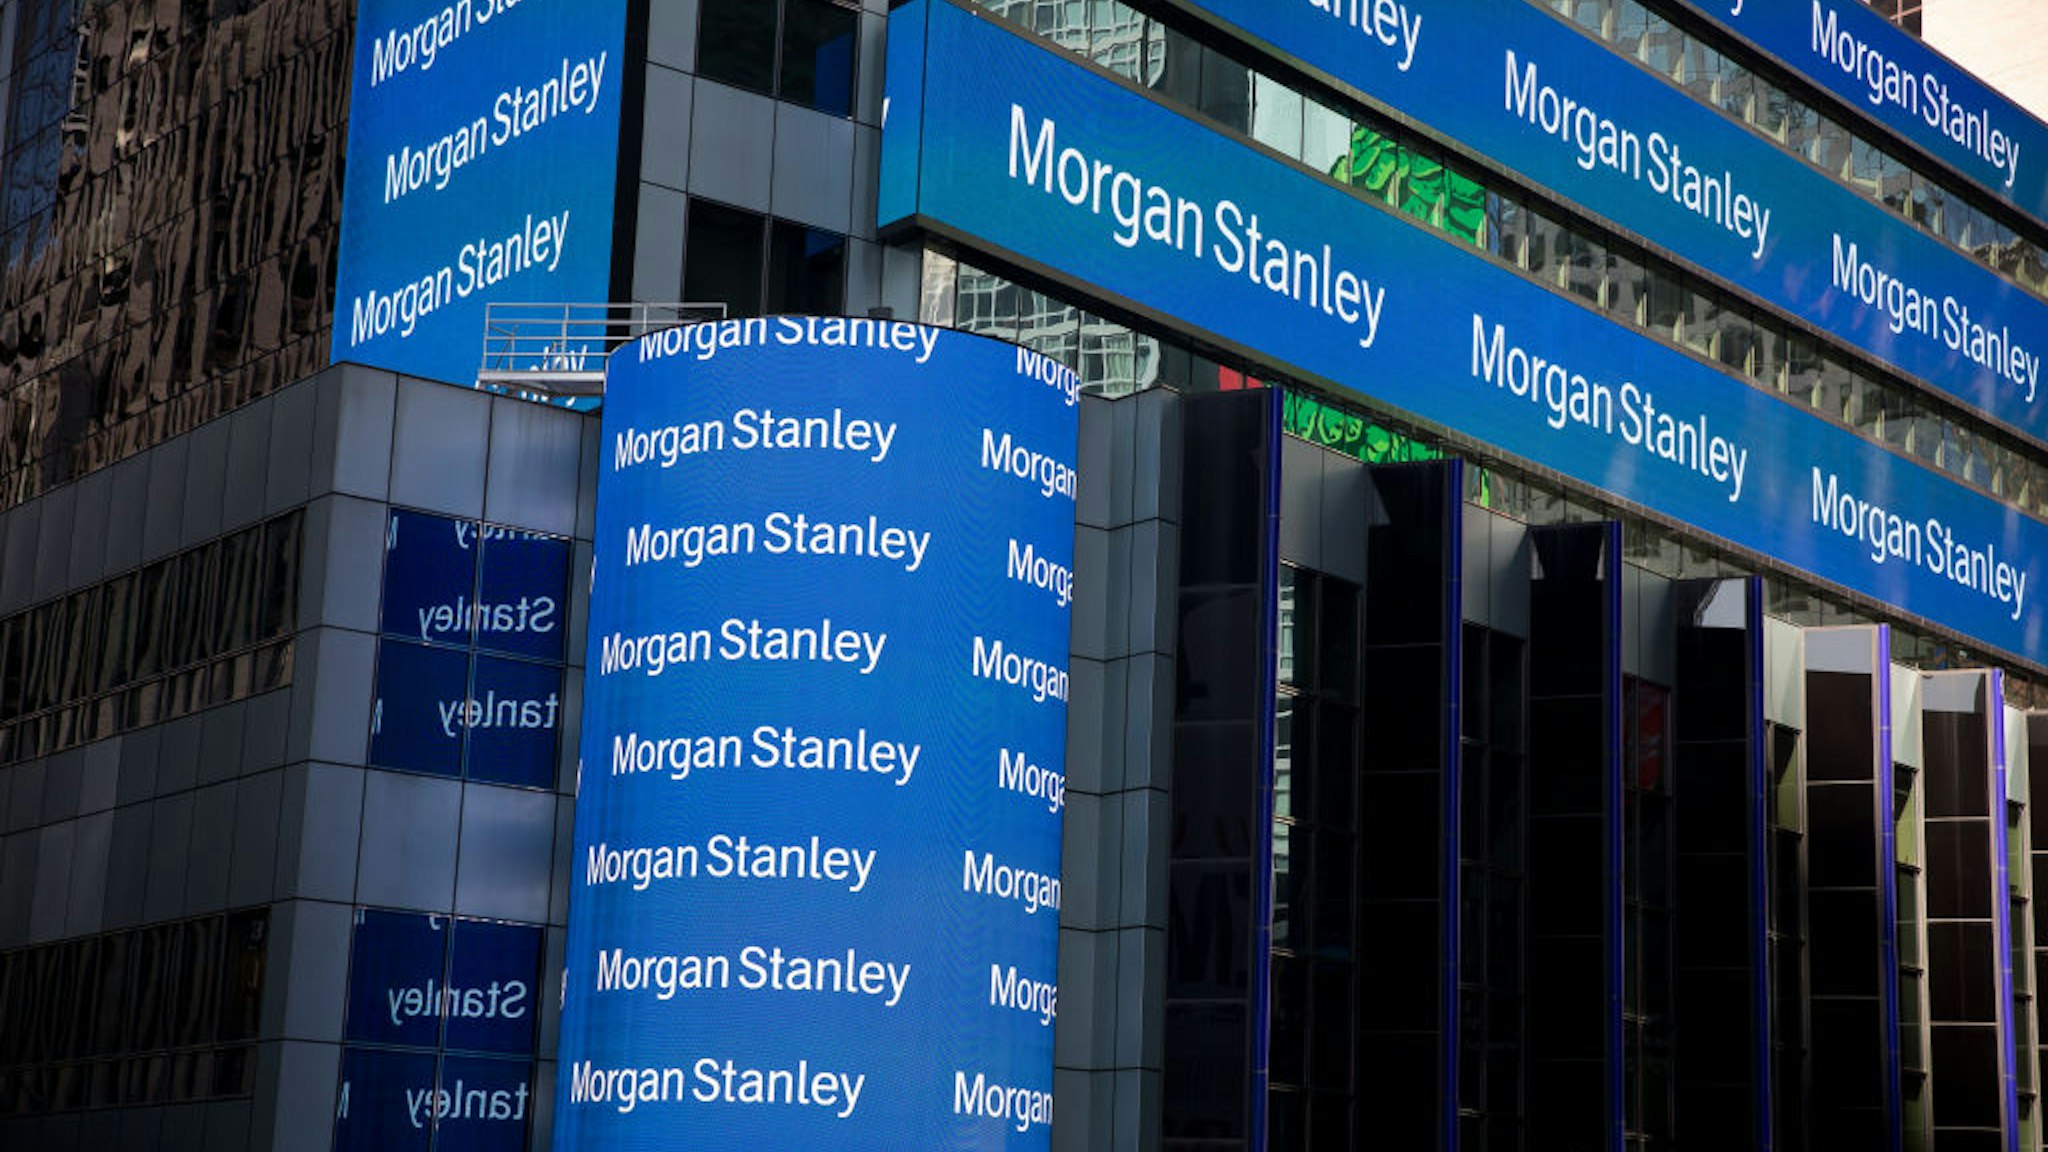 Monitors display signage outside of Morgan Stanley global headquarters in New York, U.S., on Monday, Oct. 14, 2019. Morgan Stanley is scheduled to release earnings figures on October 17.